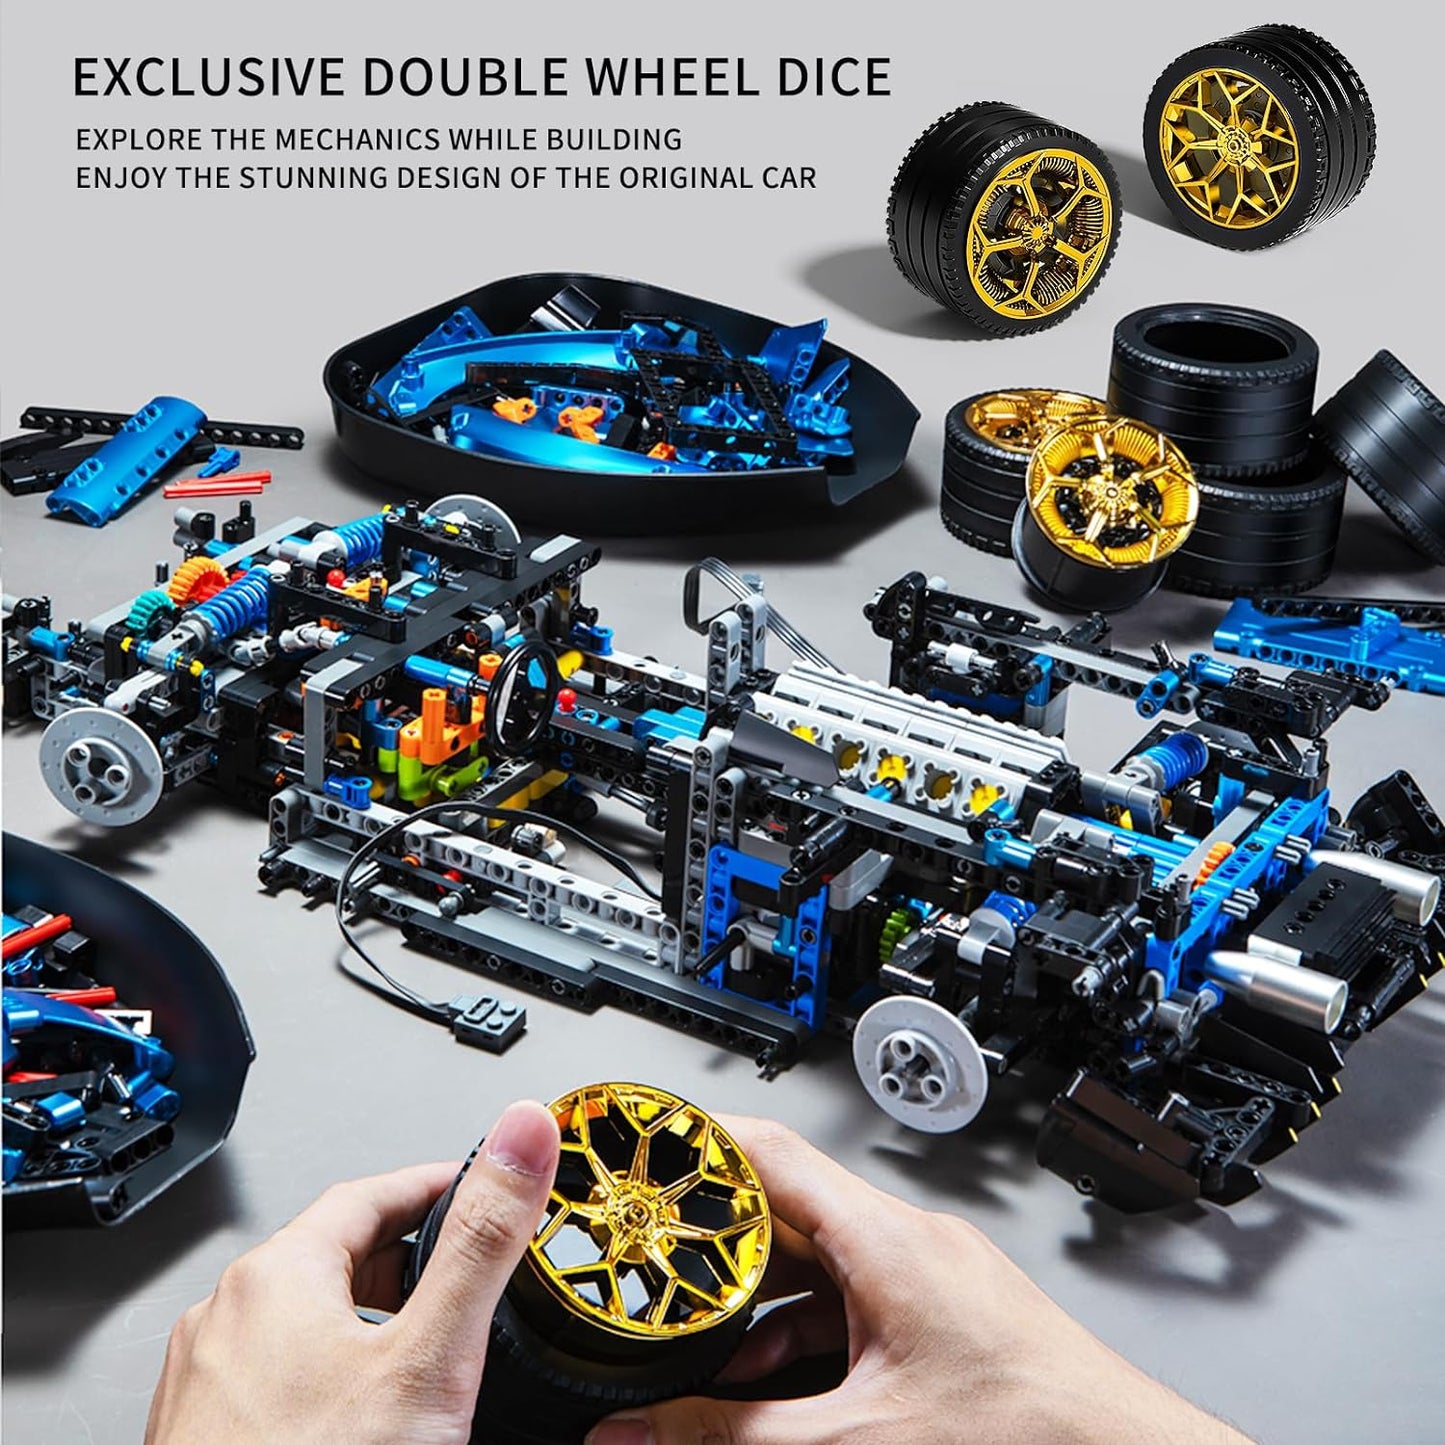 ZYLEGEN Lambo Race Car Toy Building Set,Hypercar Model Building Blocks Set Engineering Toy,1:8 Scale Supercar, Collectible Sports Car Kit for Adults Teen,Gift for Motorsport Fans(3,811Pcs)